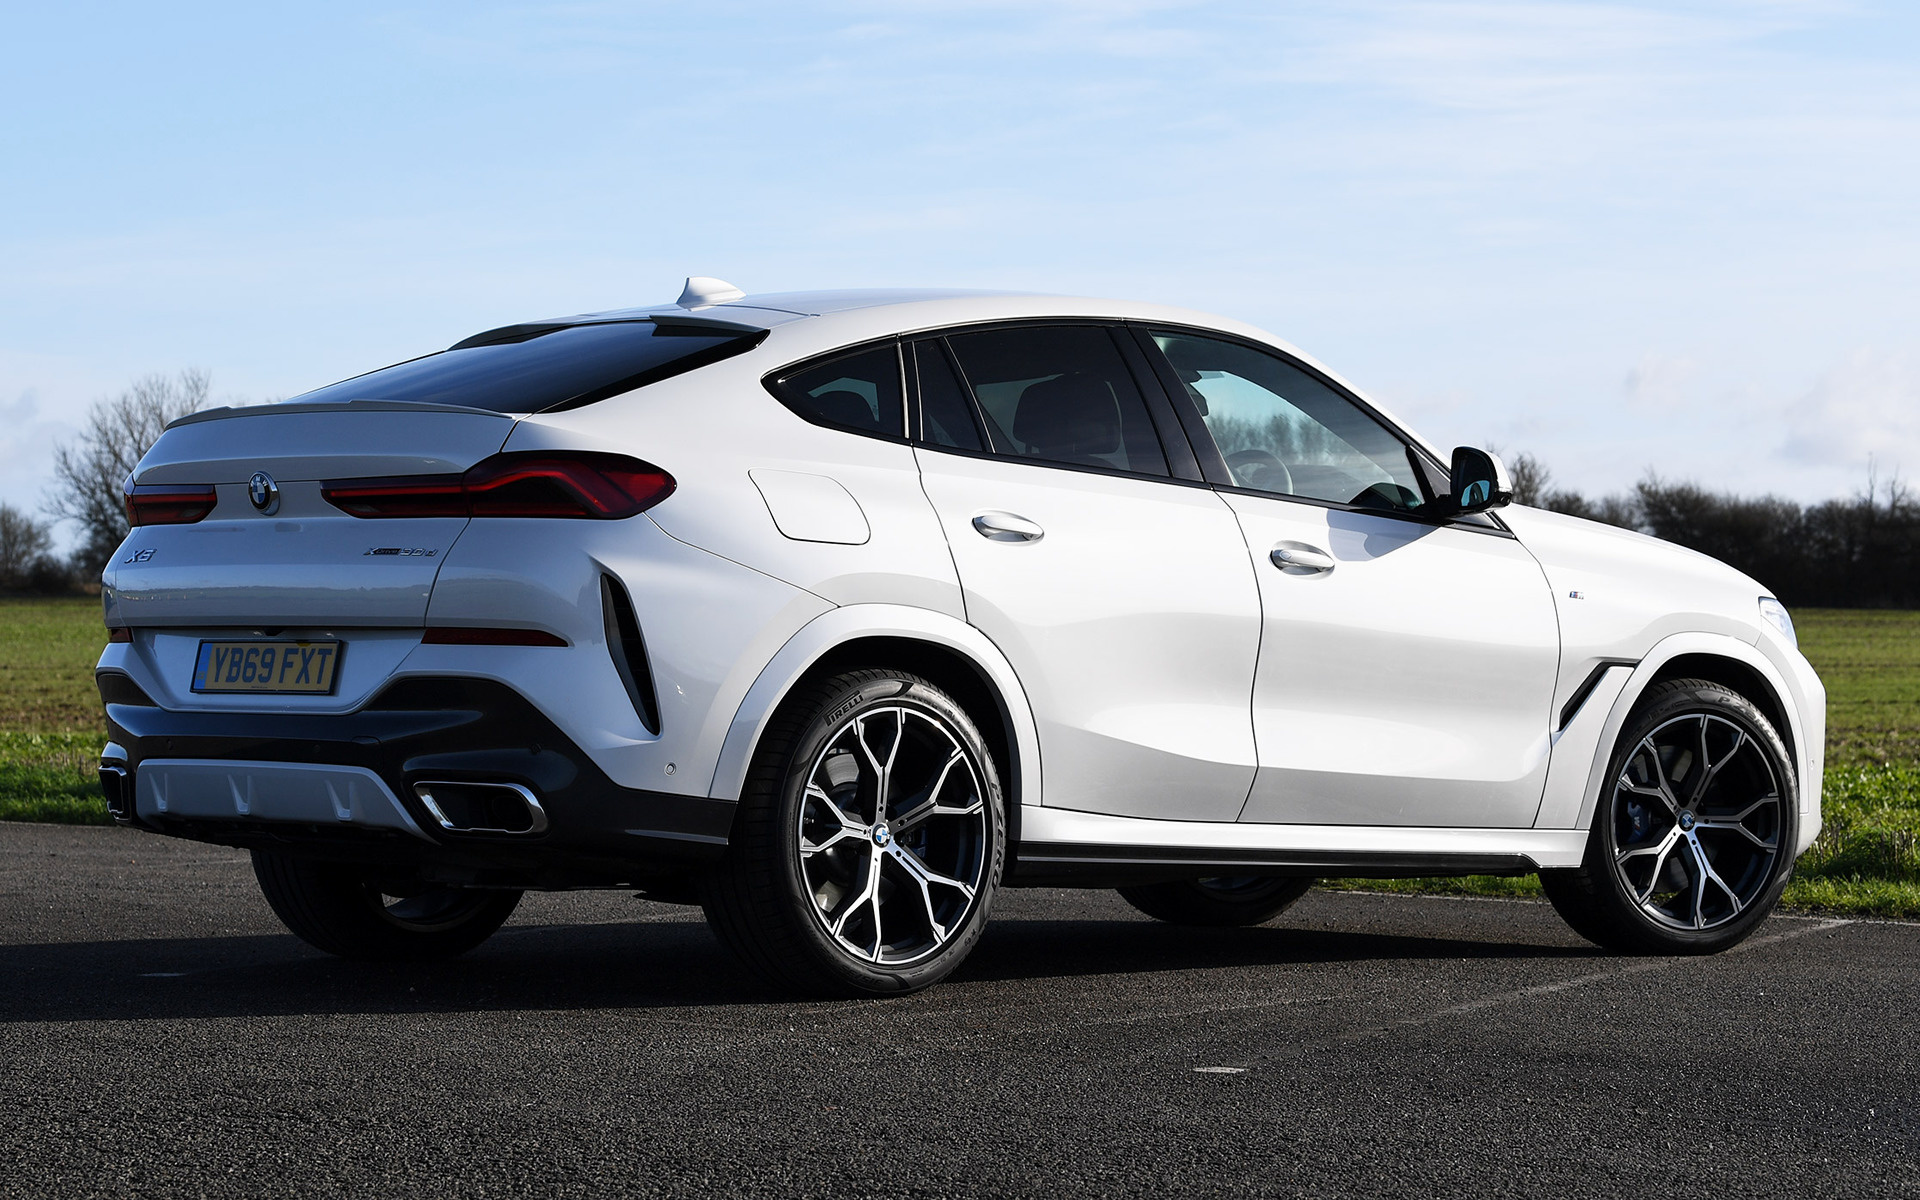 2019 BMW X6 M Sport (UK) - Wallpapers and HD Images | Car Pixel